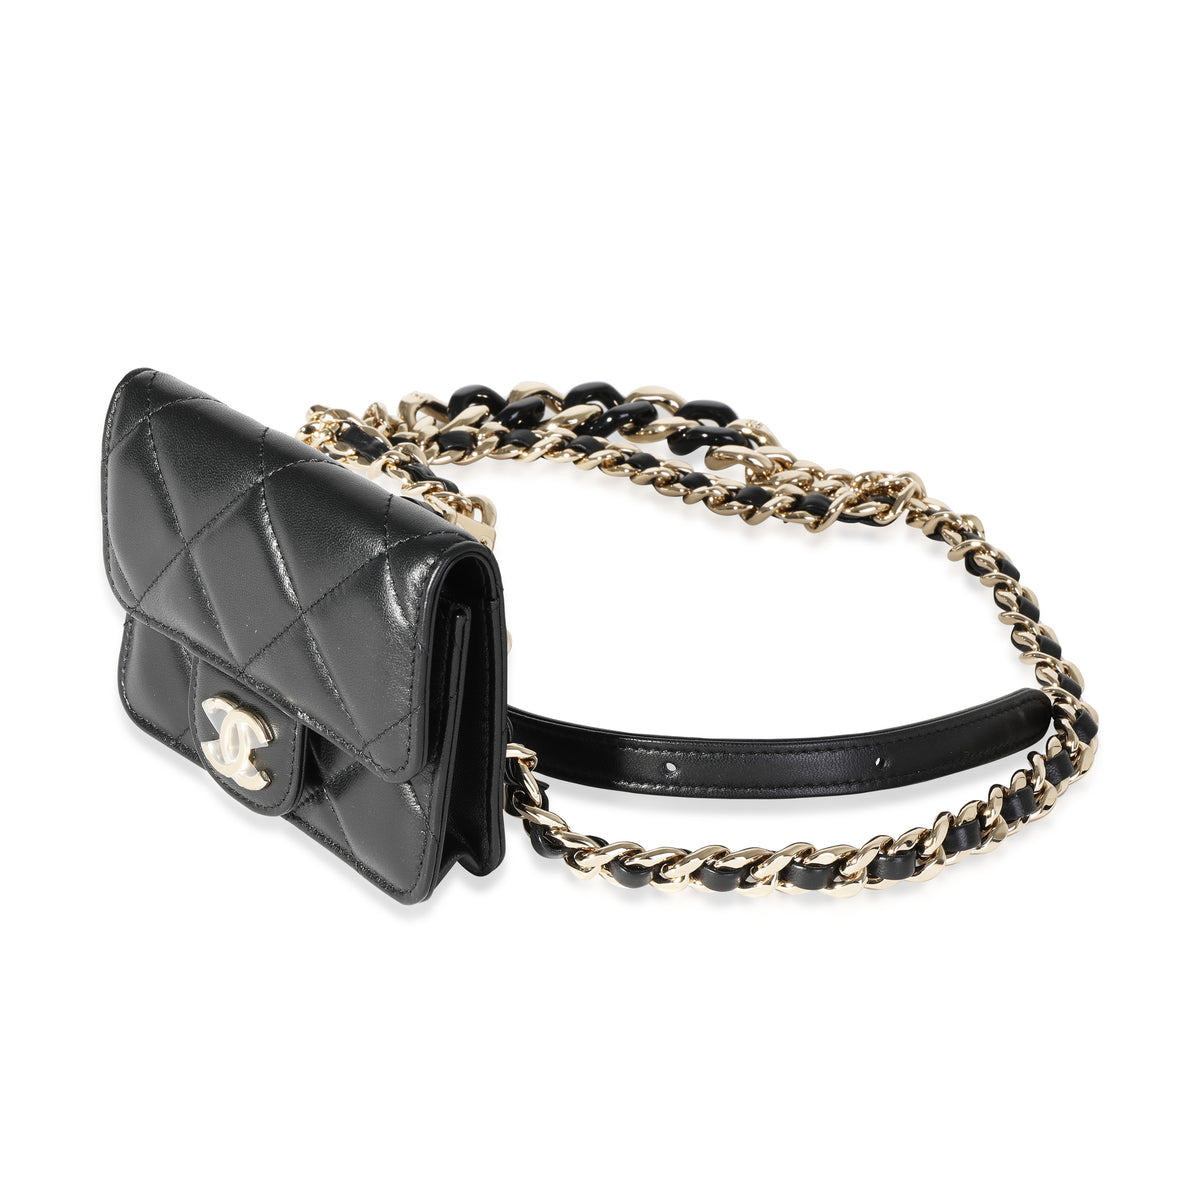 Chanel Black Quilted Caviar Leather Mini Classic Flap Chain Belt Bag 3c1026